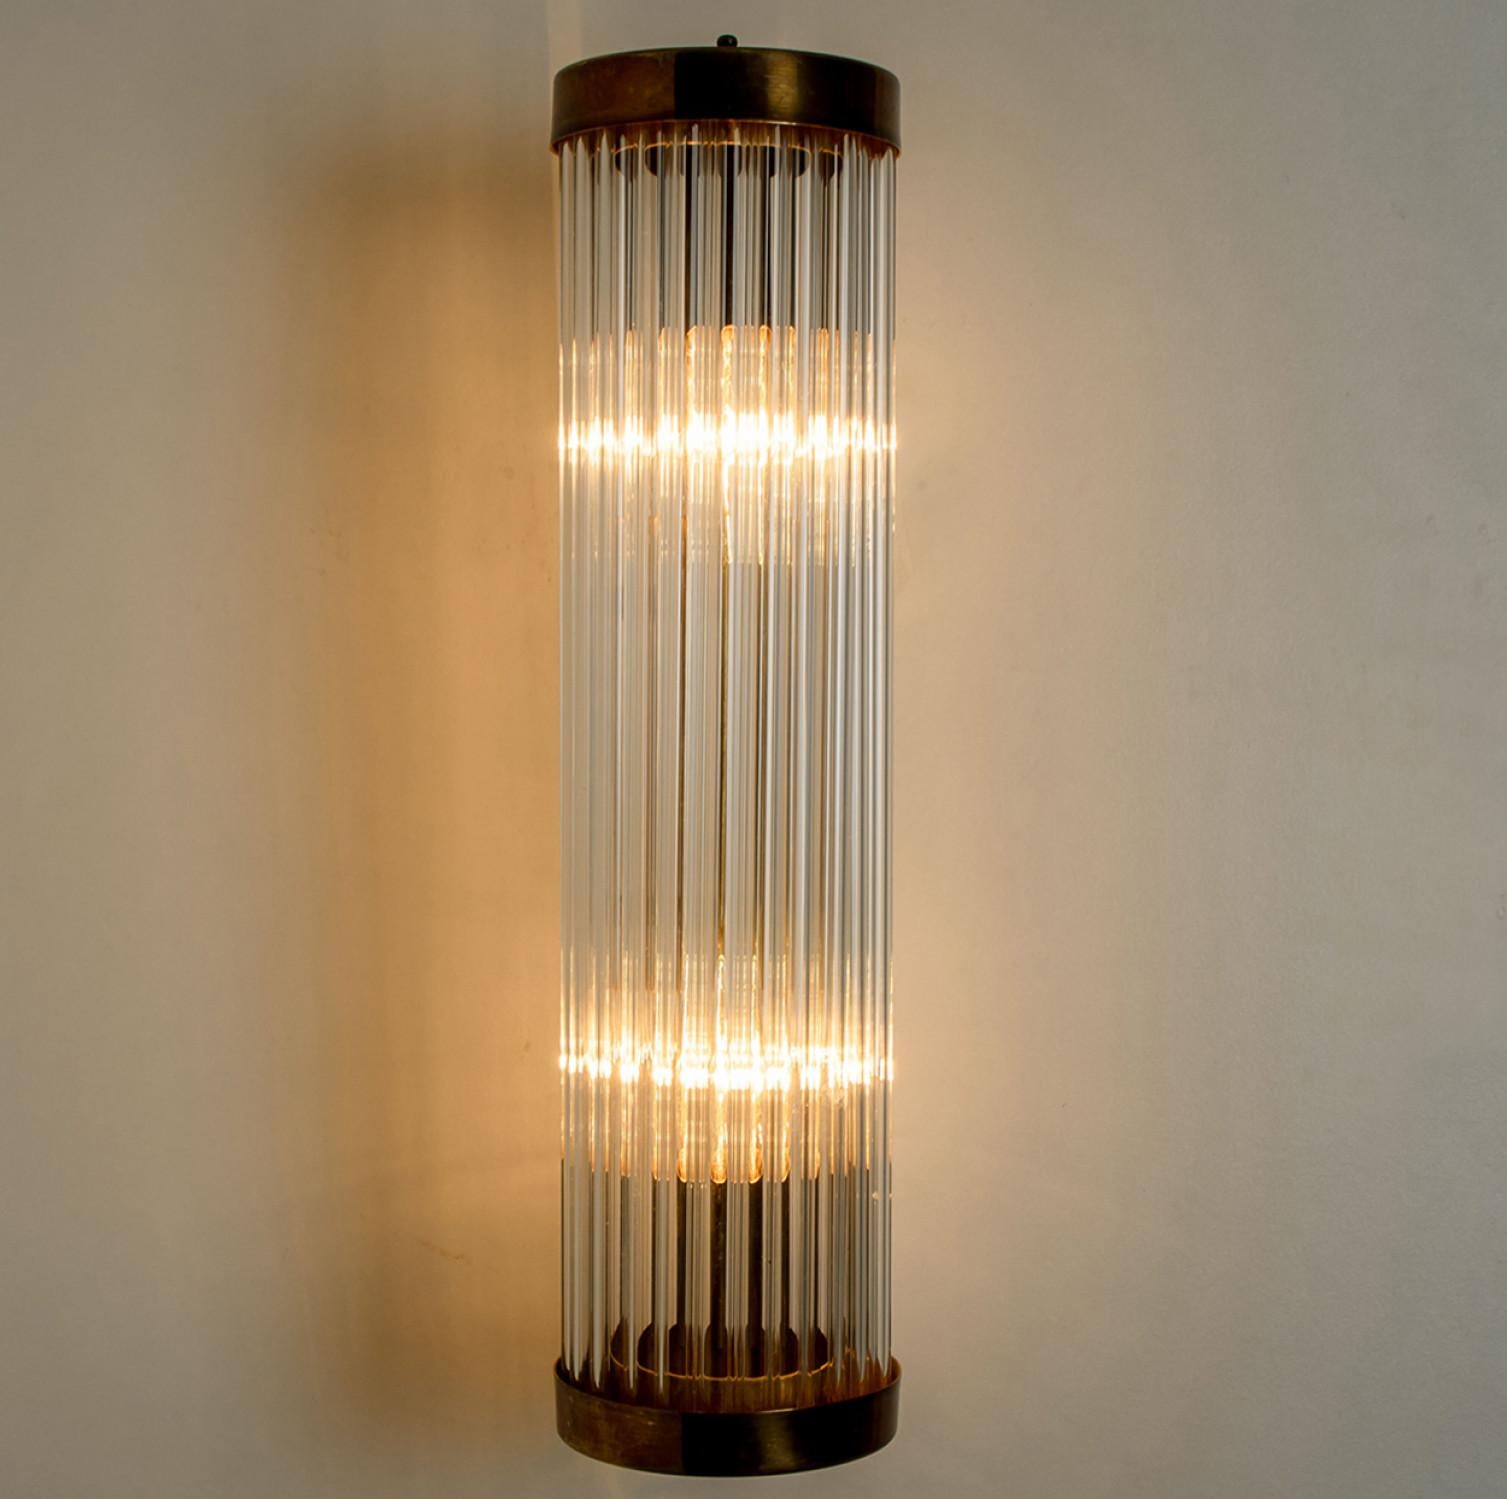 1 of the 6 Skyscraper Wall lights Art Deco Style For Sale 4